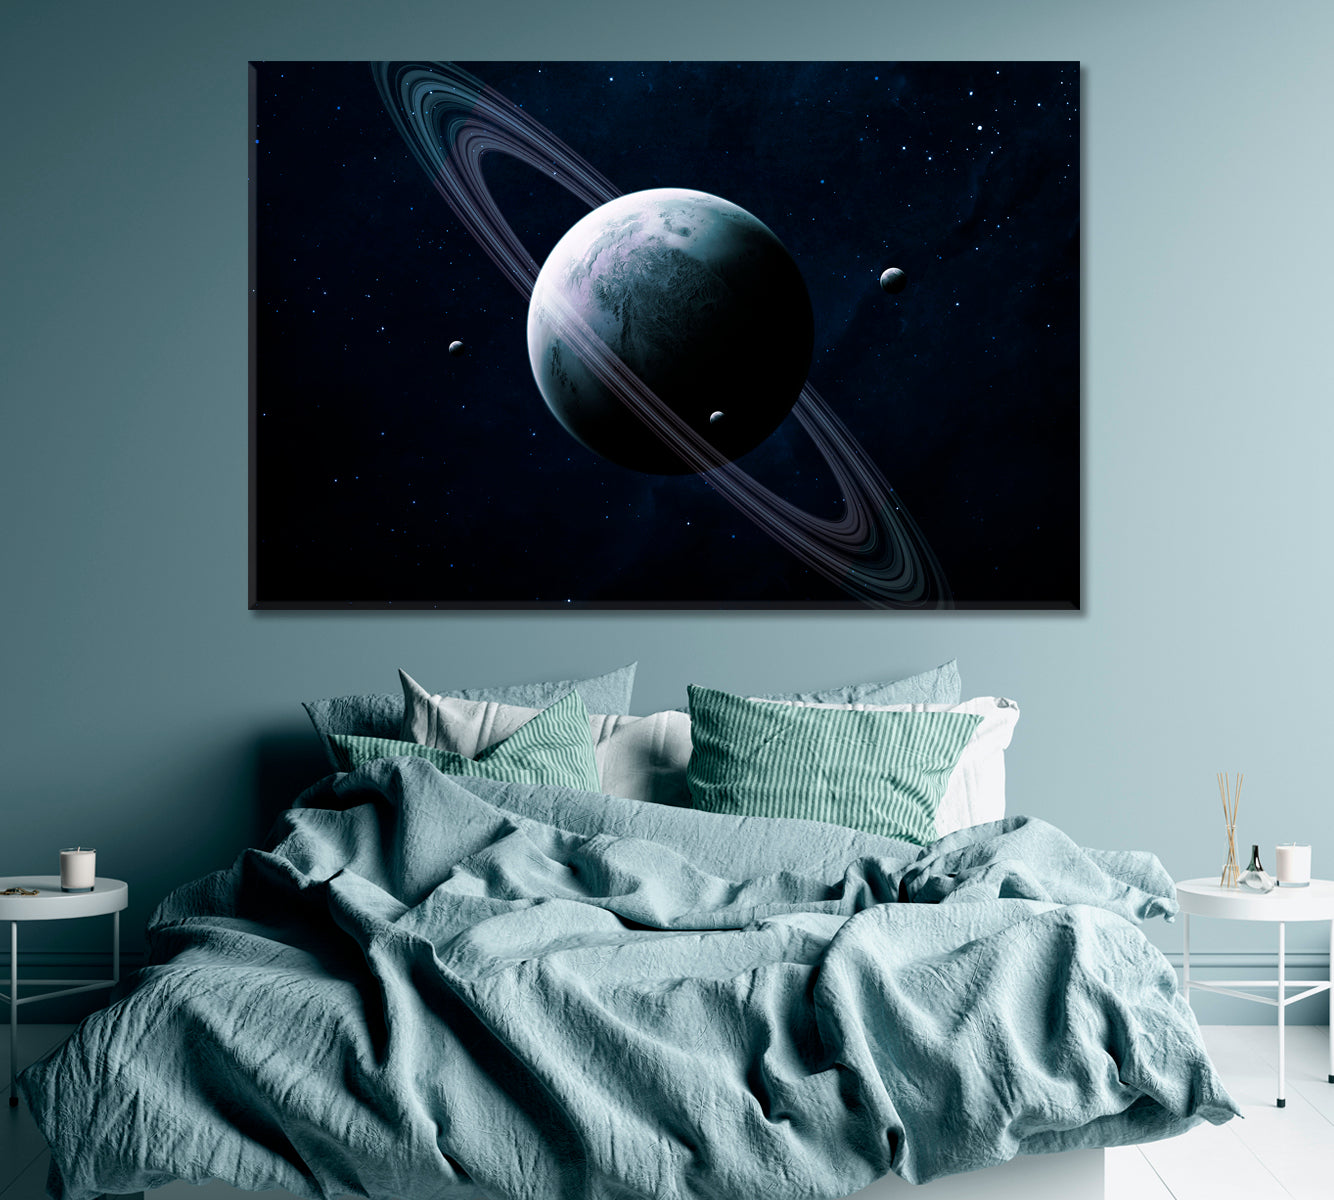 Planets in Space Canvas Print ArtLexy 1 Panel 24"x16" inches 